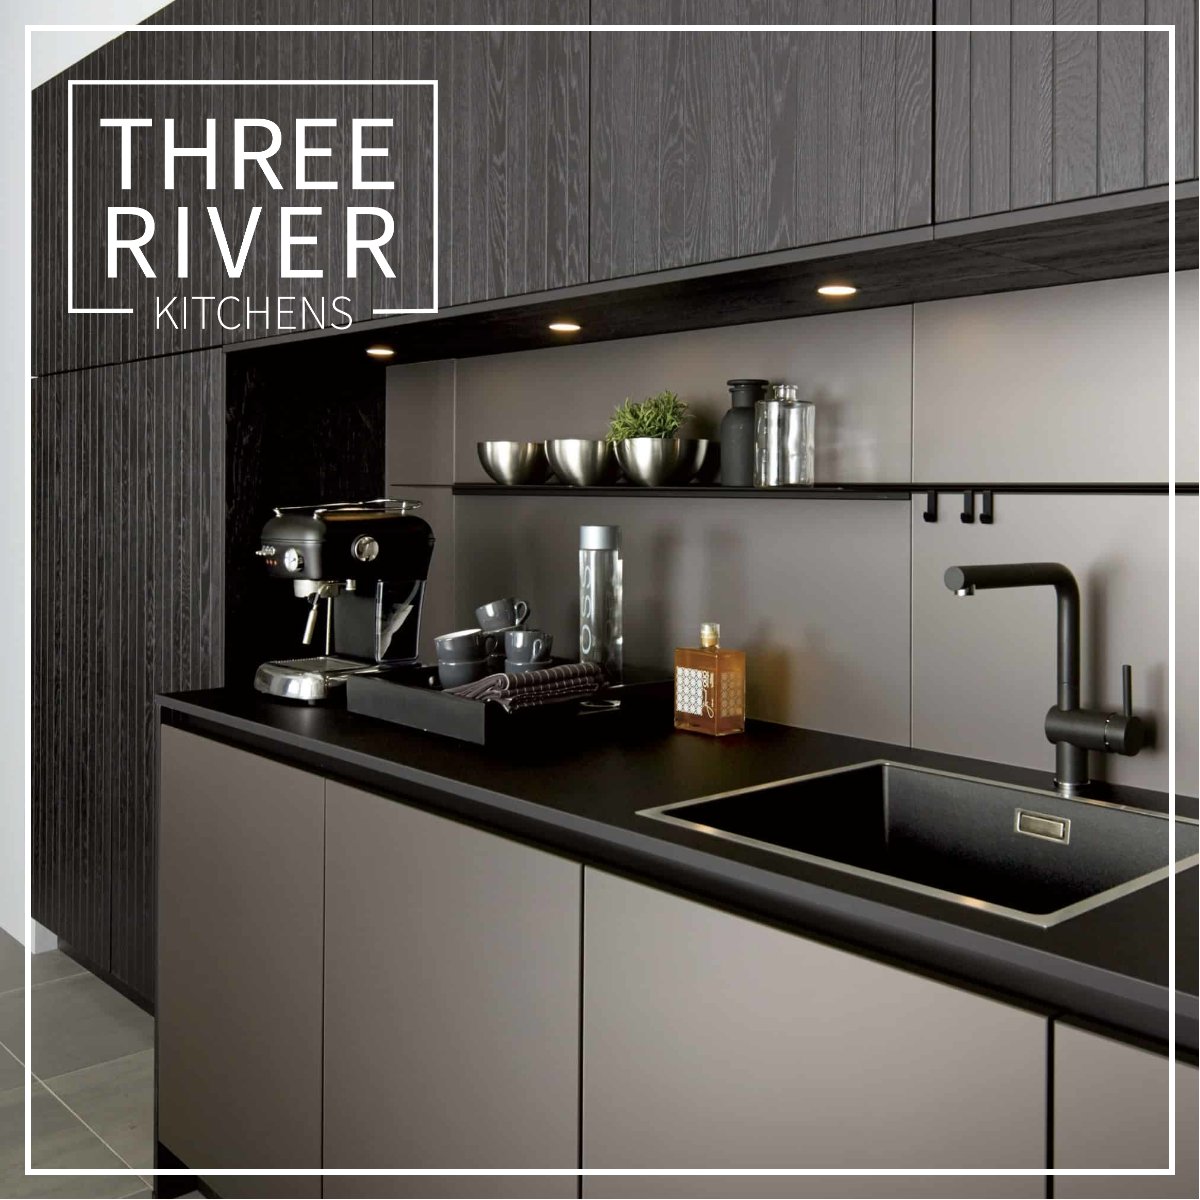 Three River Kitchens: Where modern design meets your lifestyle. Create a space that's uniquely you. Book a kitchen design consultation!  #kitchendesign #kitchenideas #kitchendesigner #kitchendesigners #kitchendesigntrends #essexbusiness #essexkitchens #chelmsfordbusiness